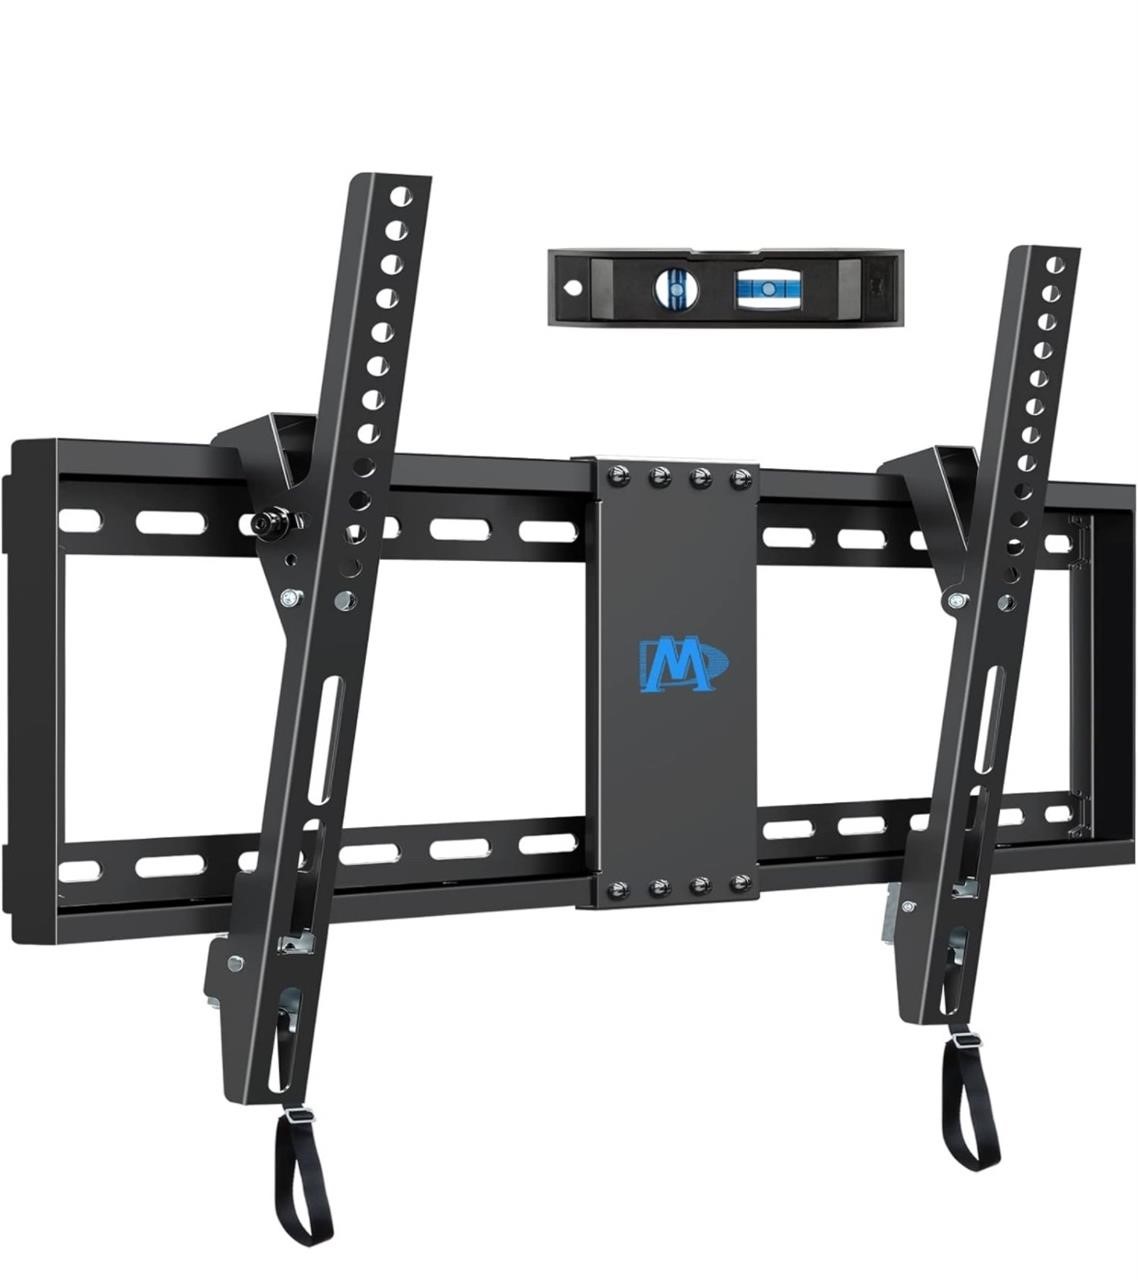 $34 TV Wall Mount for Most 37-75" TVs